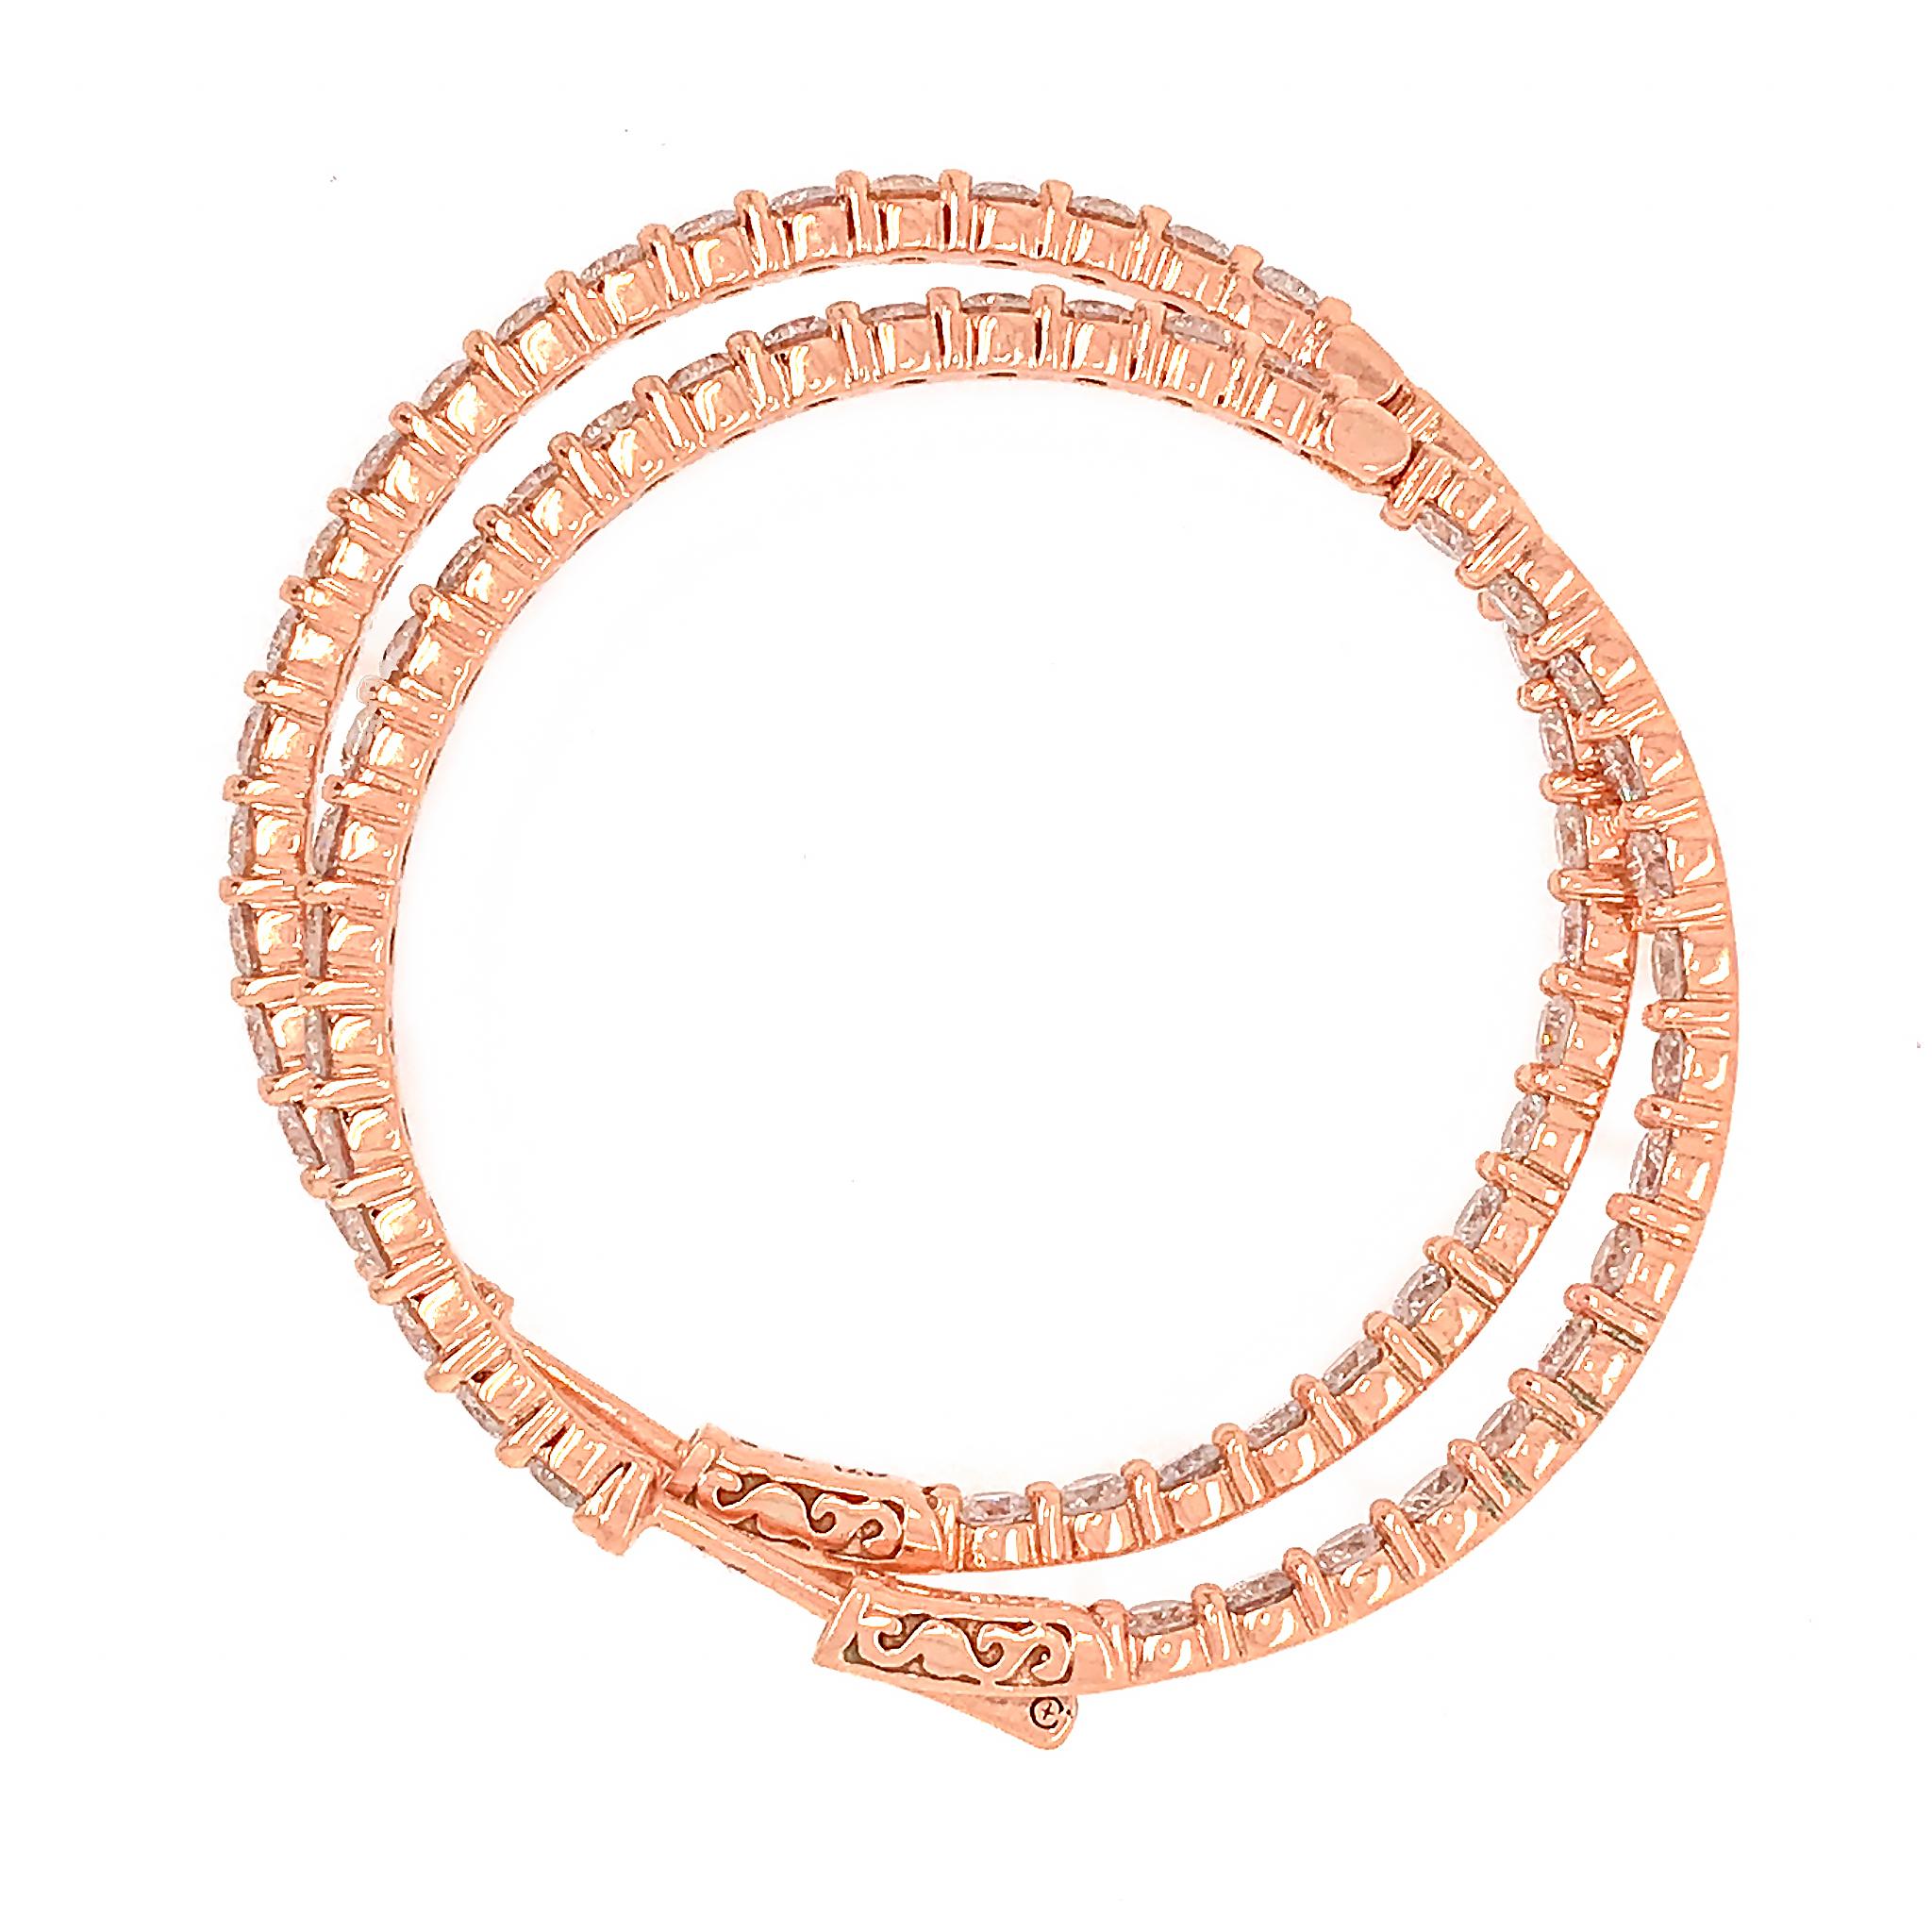 METAL TYPE: 14k Rose Gold (also available in White and Yellow Gold)
STONE WEIGHT: 7.87 ct twd
MEASUREMENT:  1.5 inches
Reference Number: TSER008R-CIHY